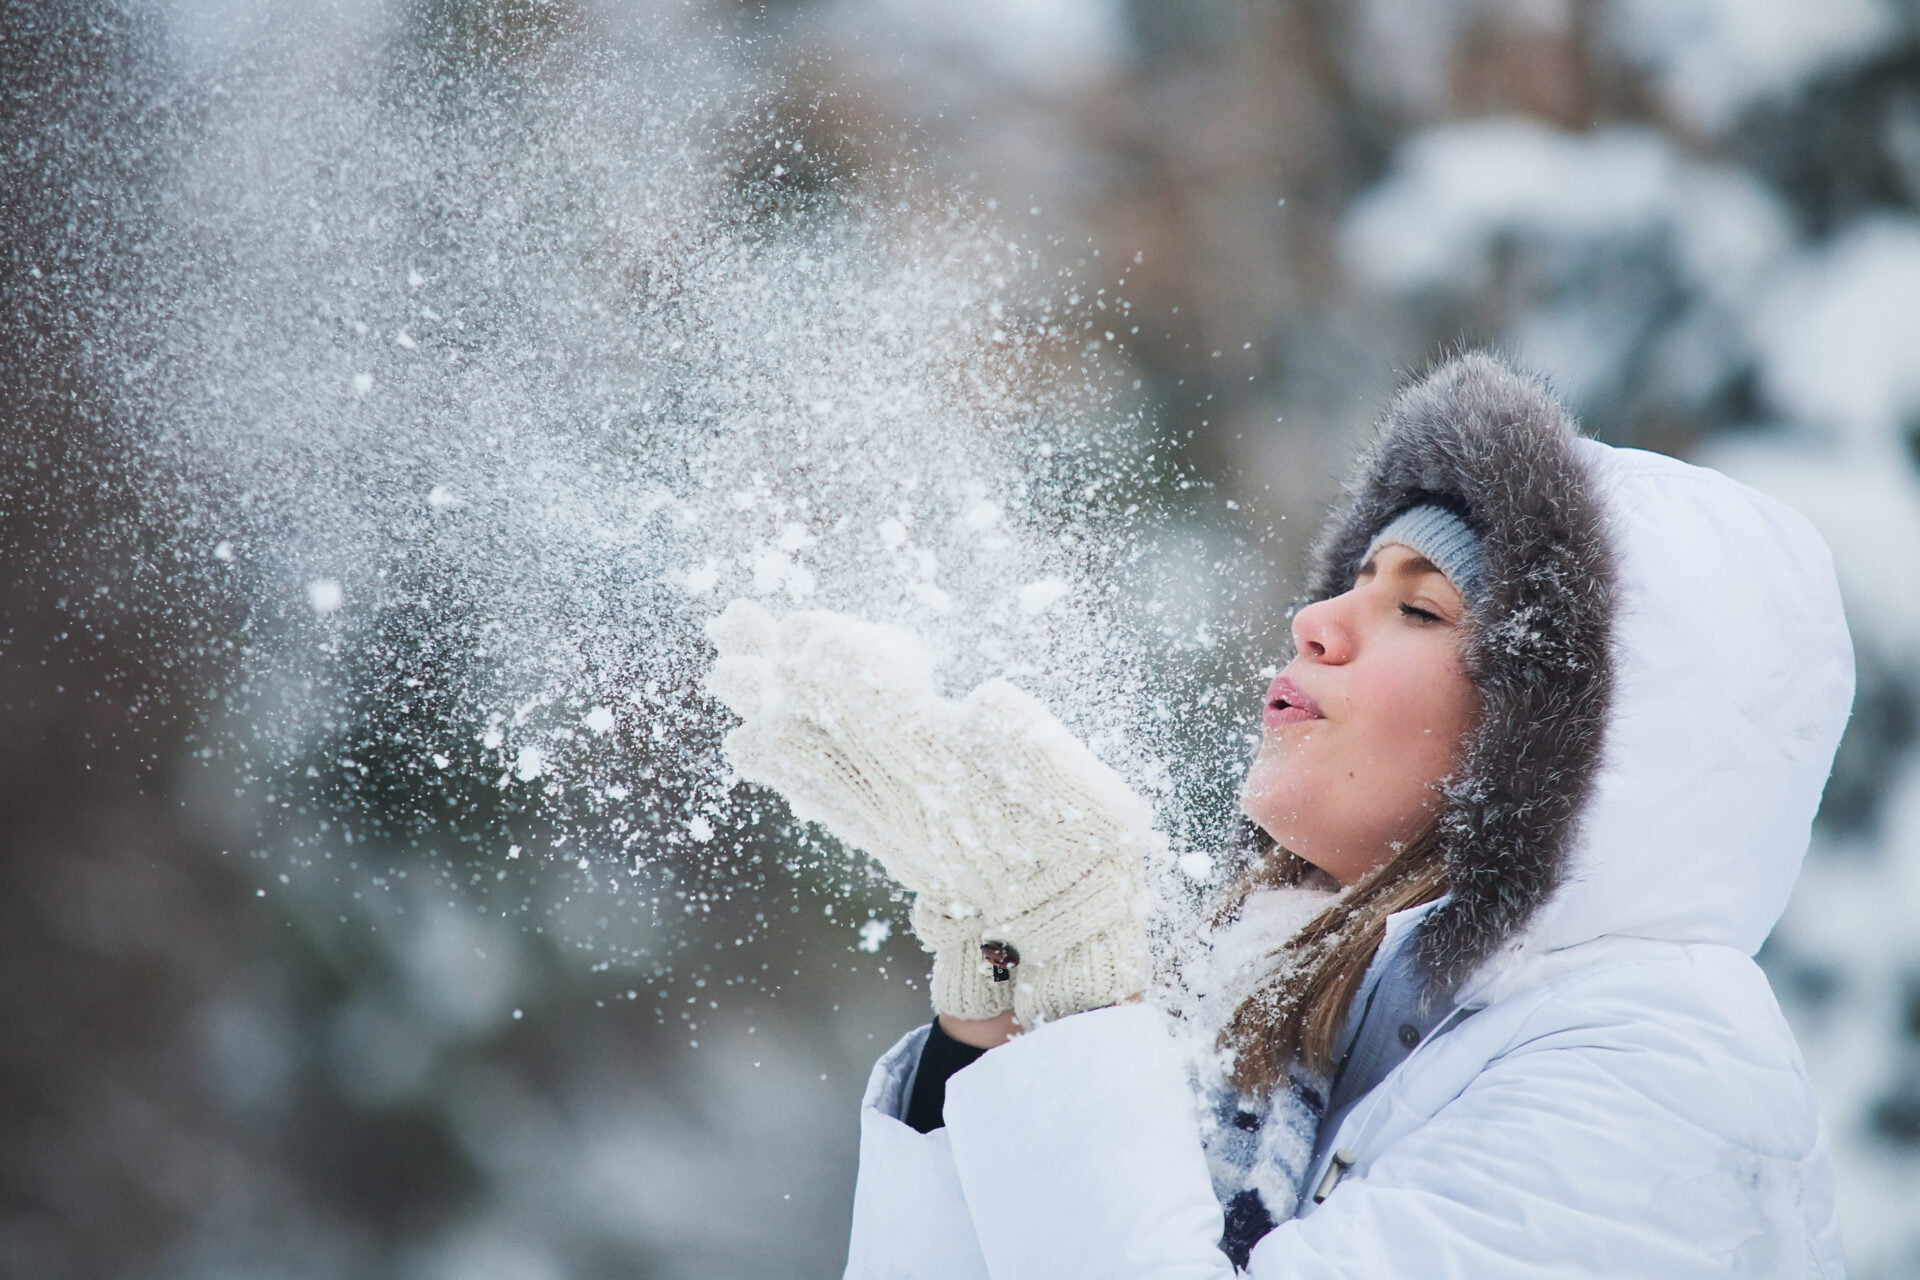 Beautiful woman blowing in the snow wearing a PFAS free jacket